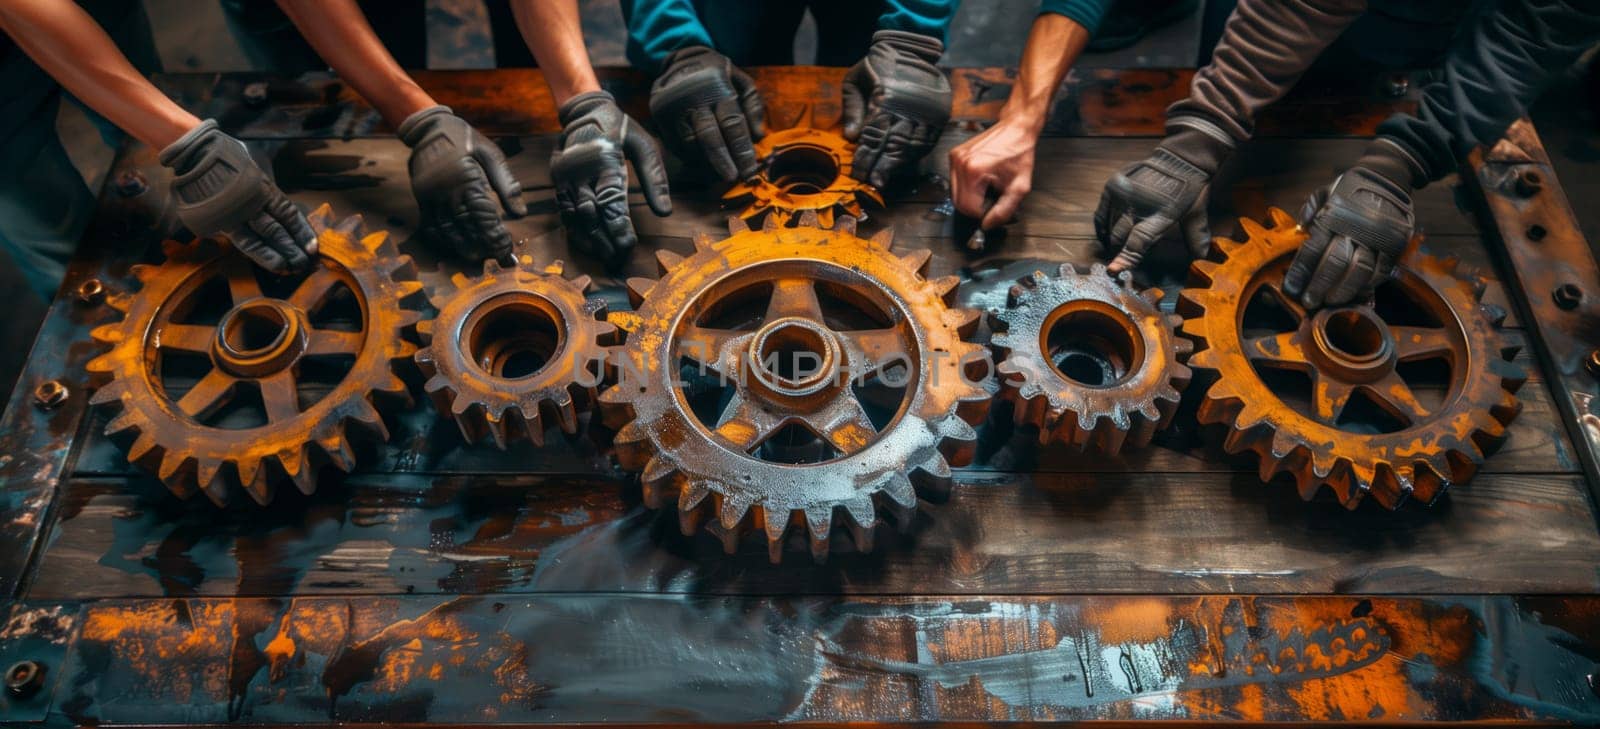 A group of individuals is collaborating on gears at a table, surrounded by automotive tires, bicycle parts, water, rims, and terrestrial plants, combining elements of art, engineering, and auto parts